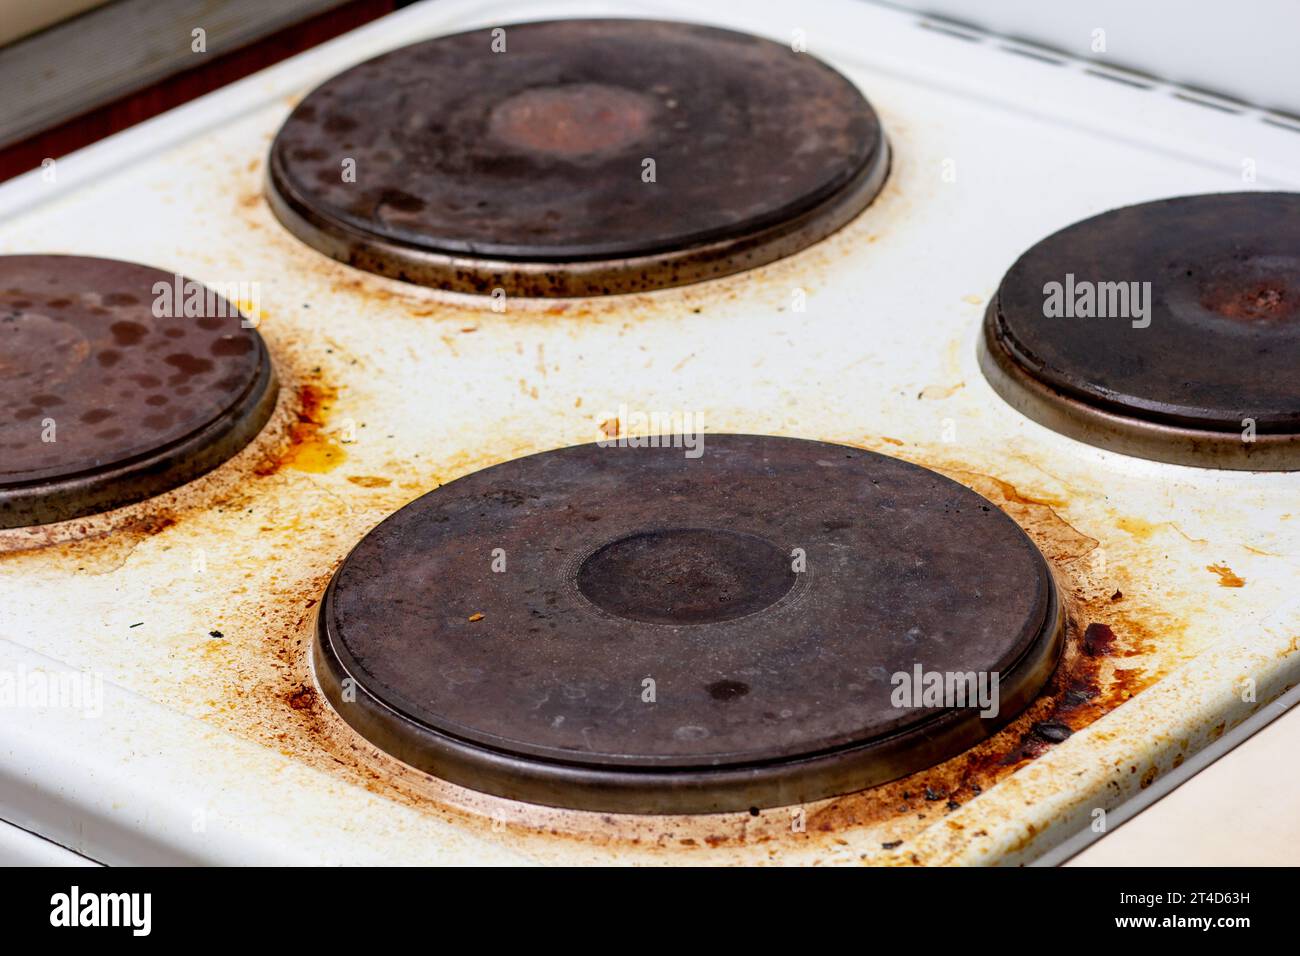 https://c8.alamy.com/comp/2T4D63H/dirty-white-electric-stove-with-fat-on-surface-2T4D63H.jpg